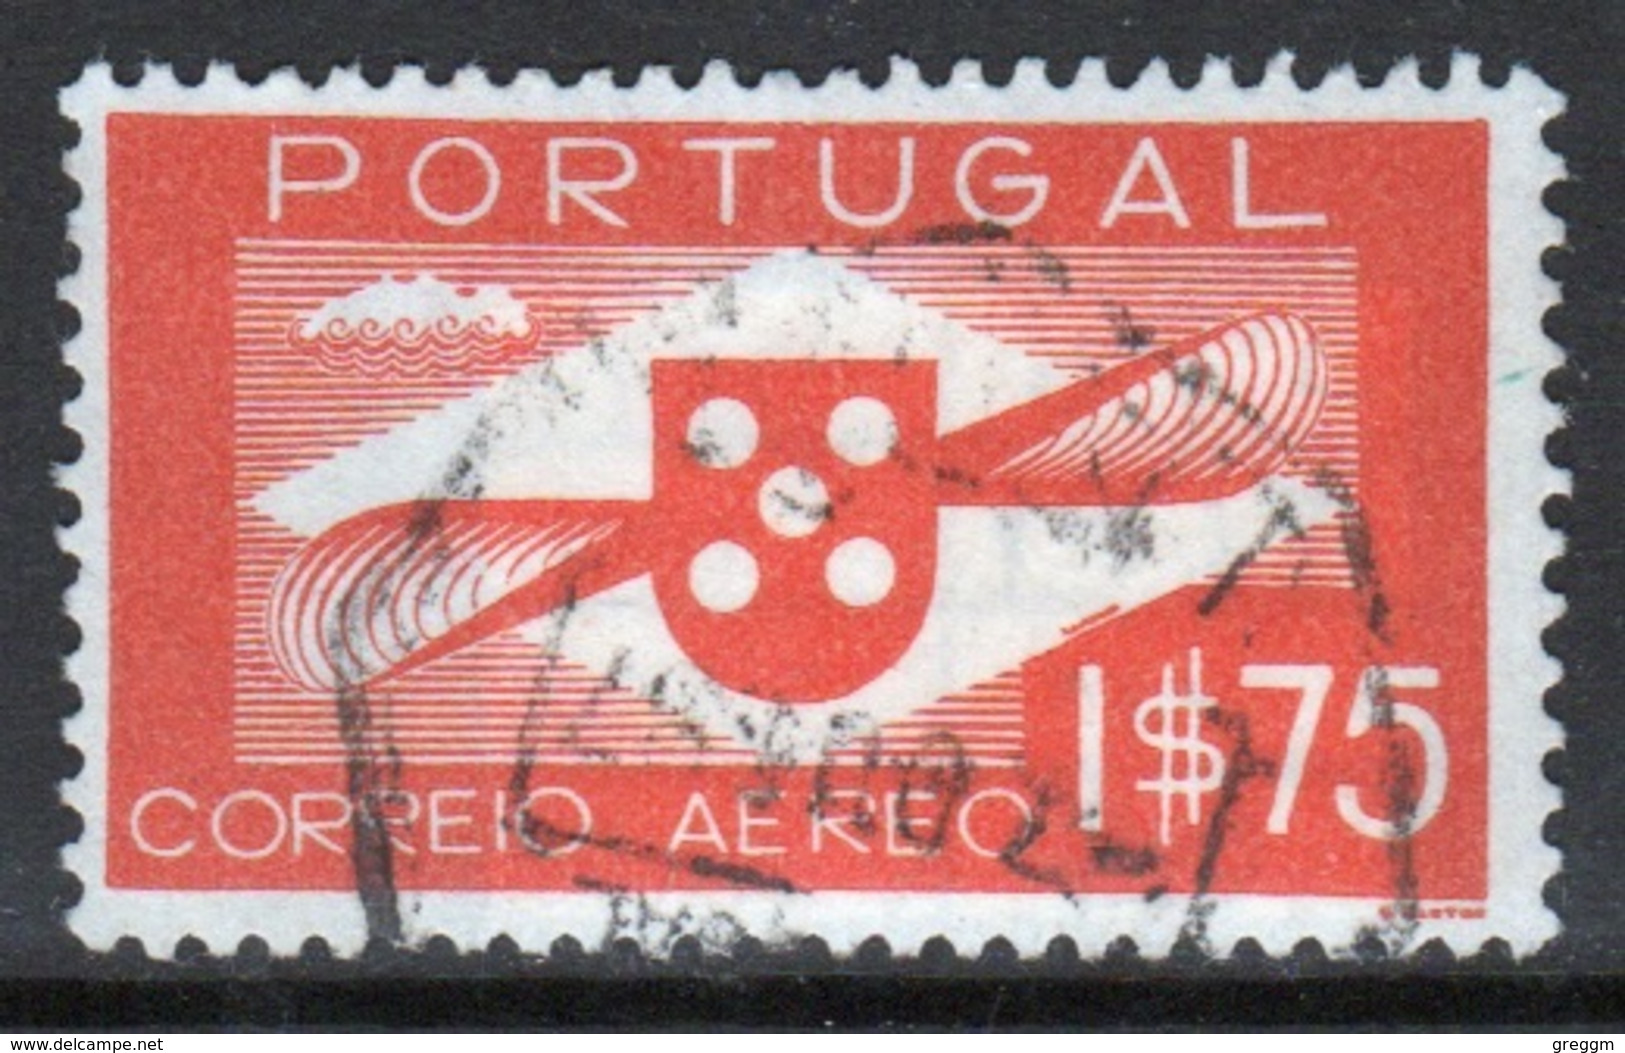 Portugal 1937 A Single $1.75  Stamp Used For AirMail. - Used Stamps